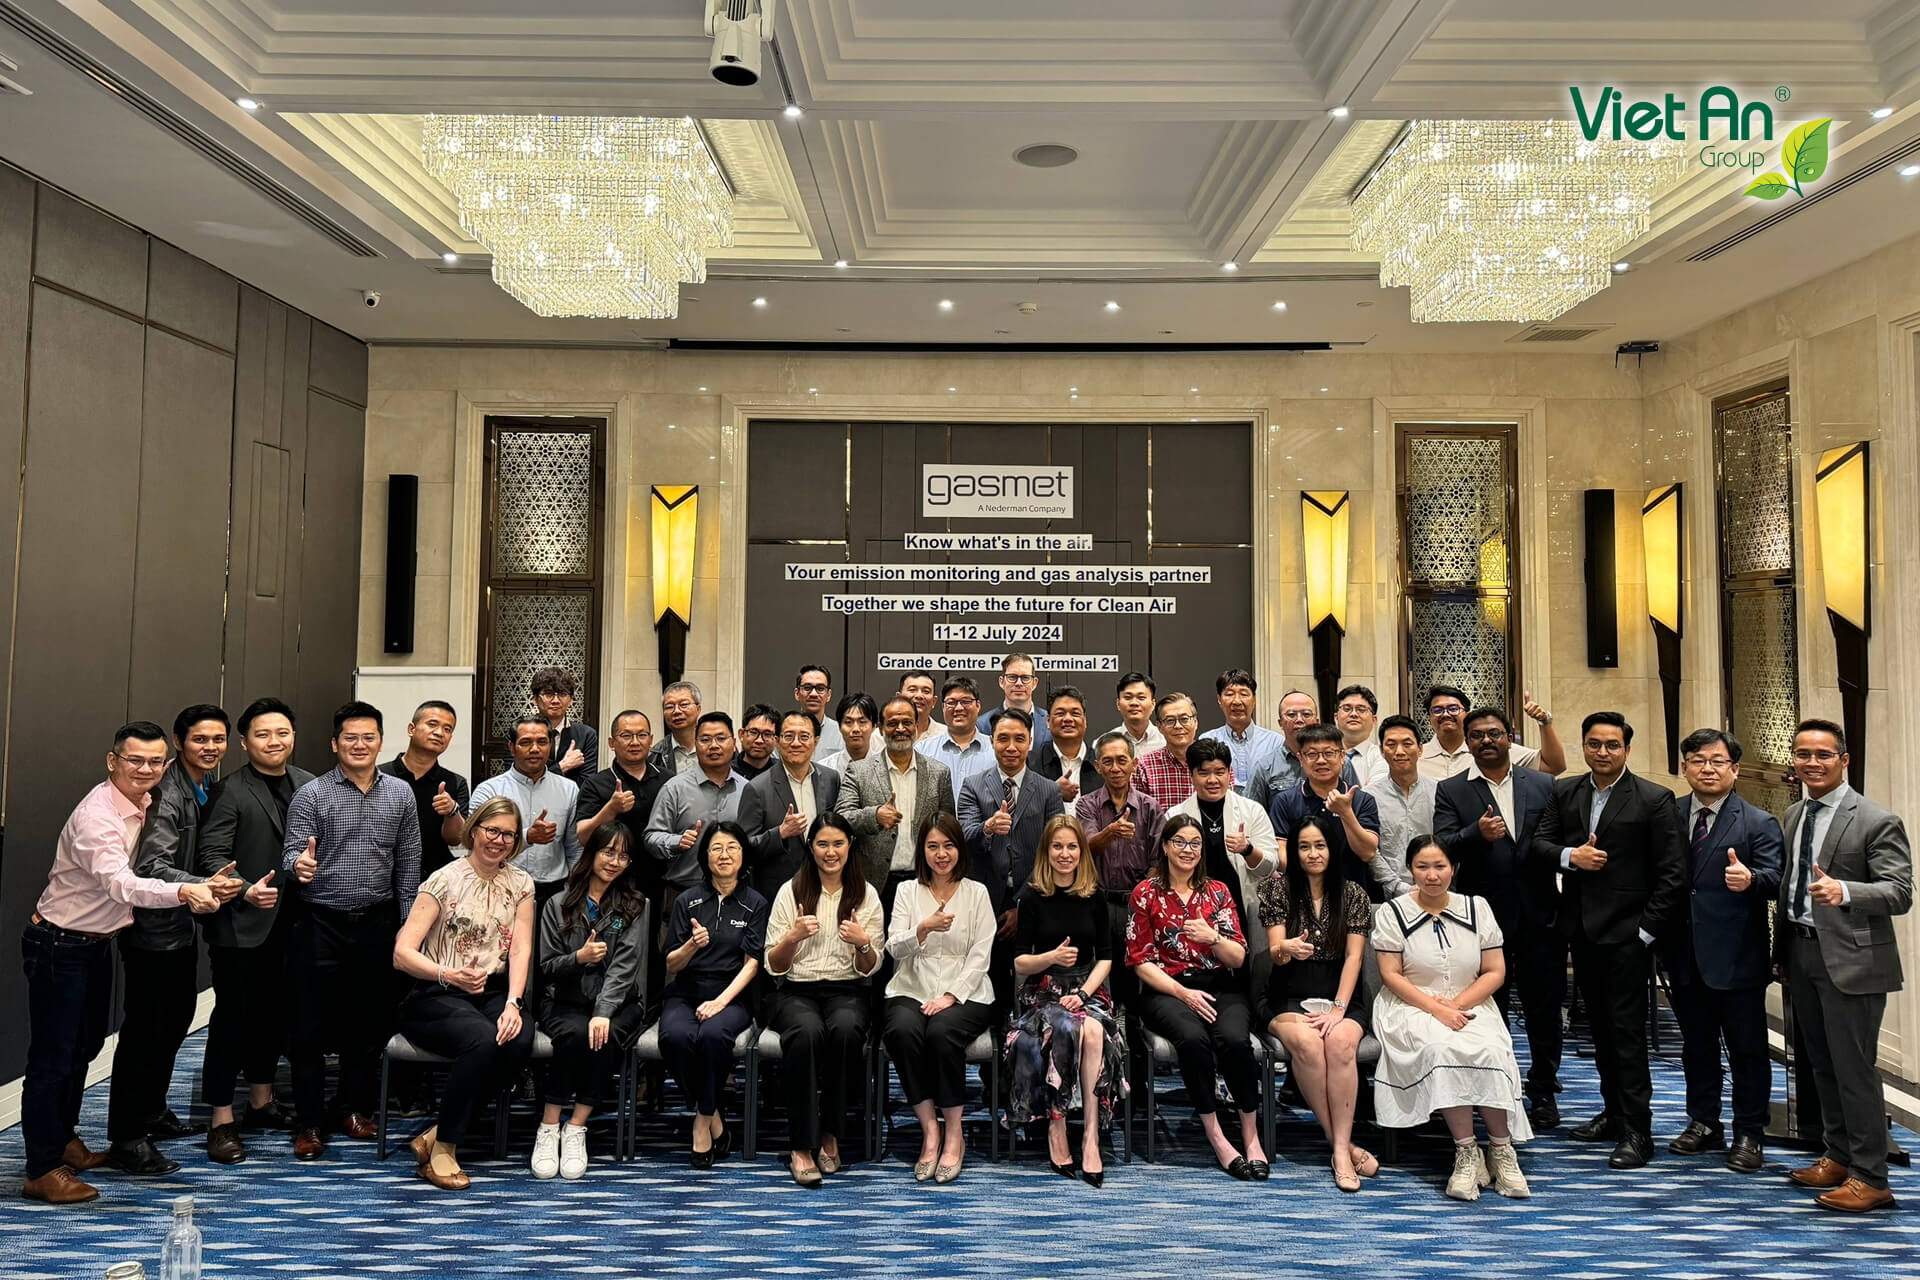 Viet An is attending the Gasmet APAC Partner Meeting in Thailand.